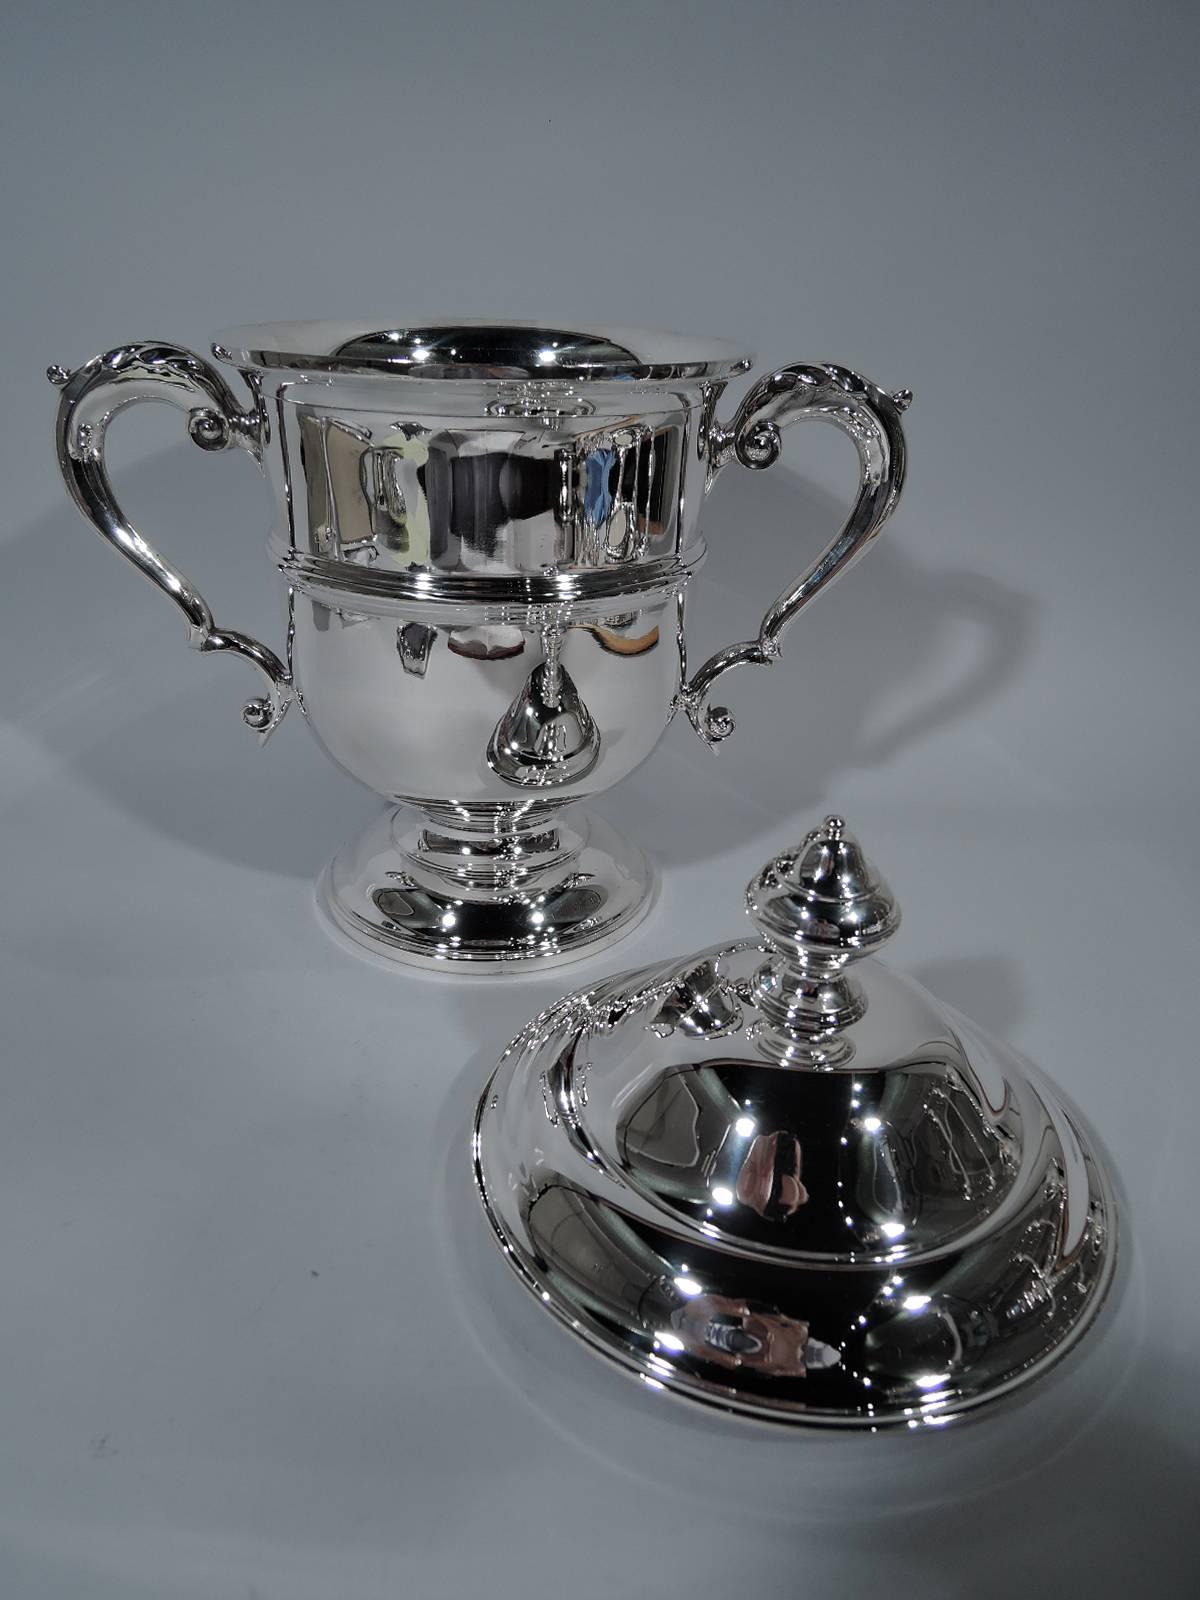 Traditional sterling silver covered trophy cup. Retailed by Tiffany & Co. in New York. Urn with leaf-capped double-scroll sides handles, raised foot and molded band. Double-domed cover with vase finial. A large version of the classic form with